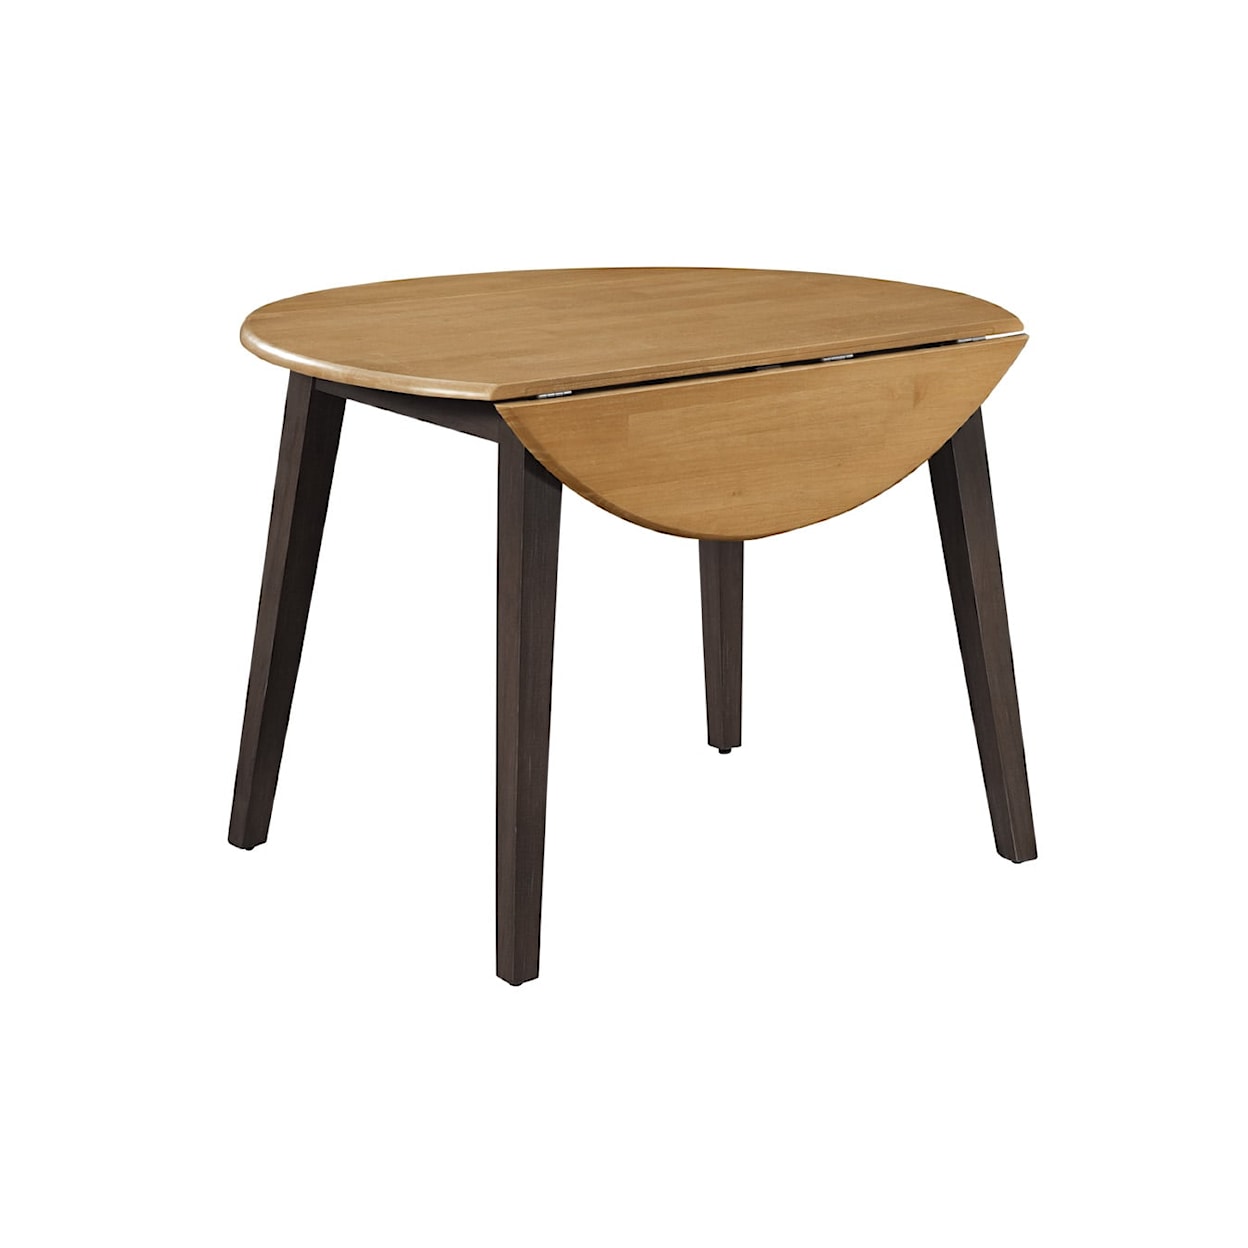 John Thomas Dining Essentials 42" RoundTable in Hickory & Coal